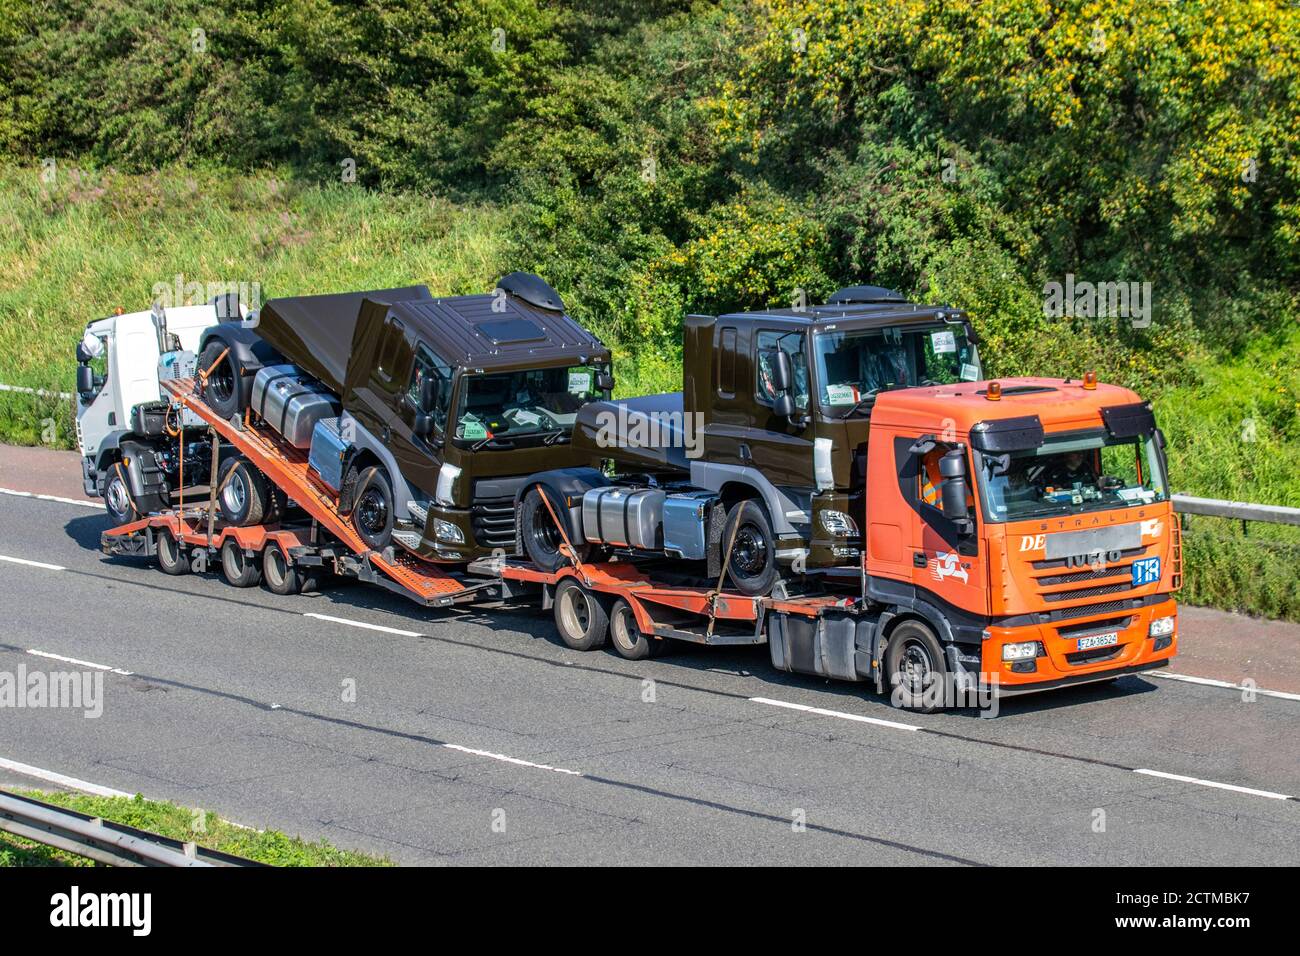 De Rooy Leyland Haulage delivery trucks, lorry, transportation, lowloader truck, cargo carrier, new DAF vehicle, European commercial transport, industry, M6 at Manchester, UK Stock Photo